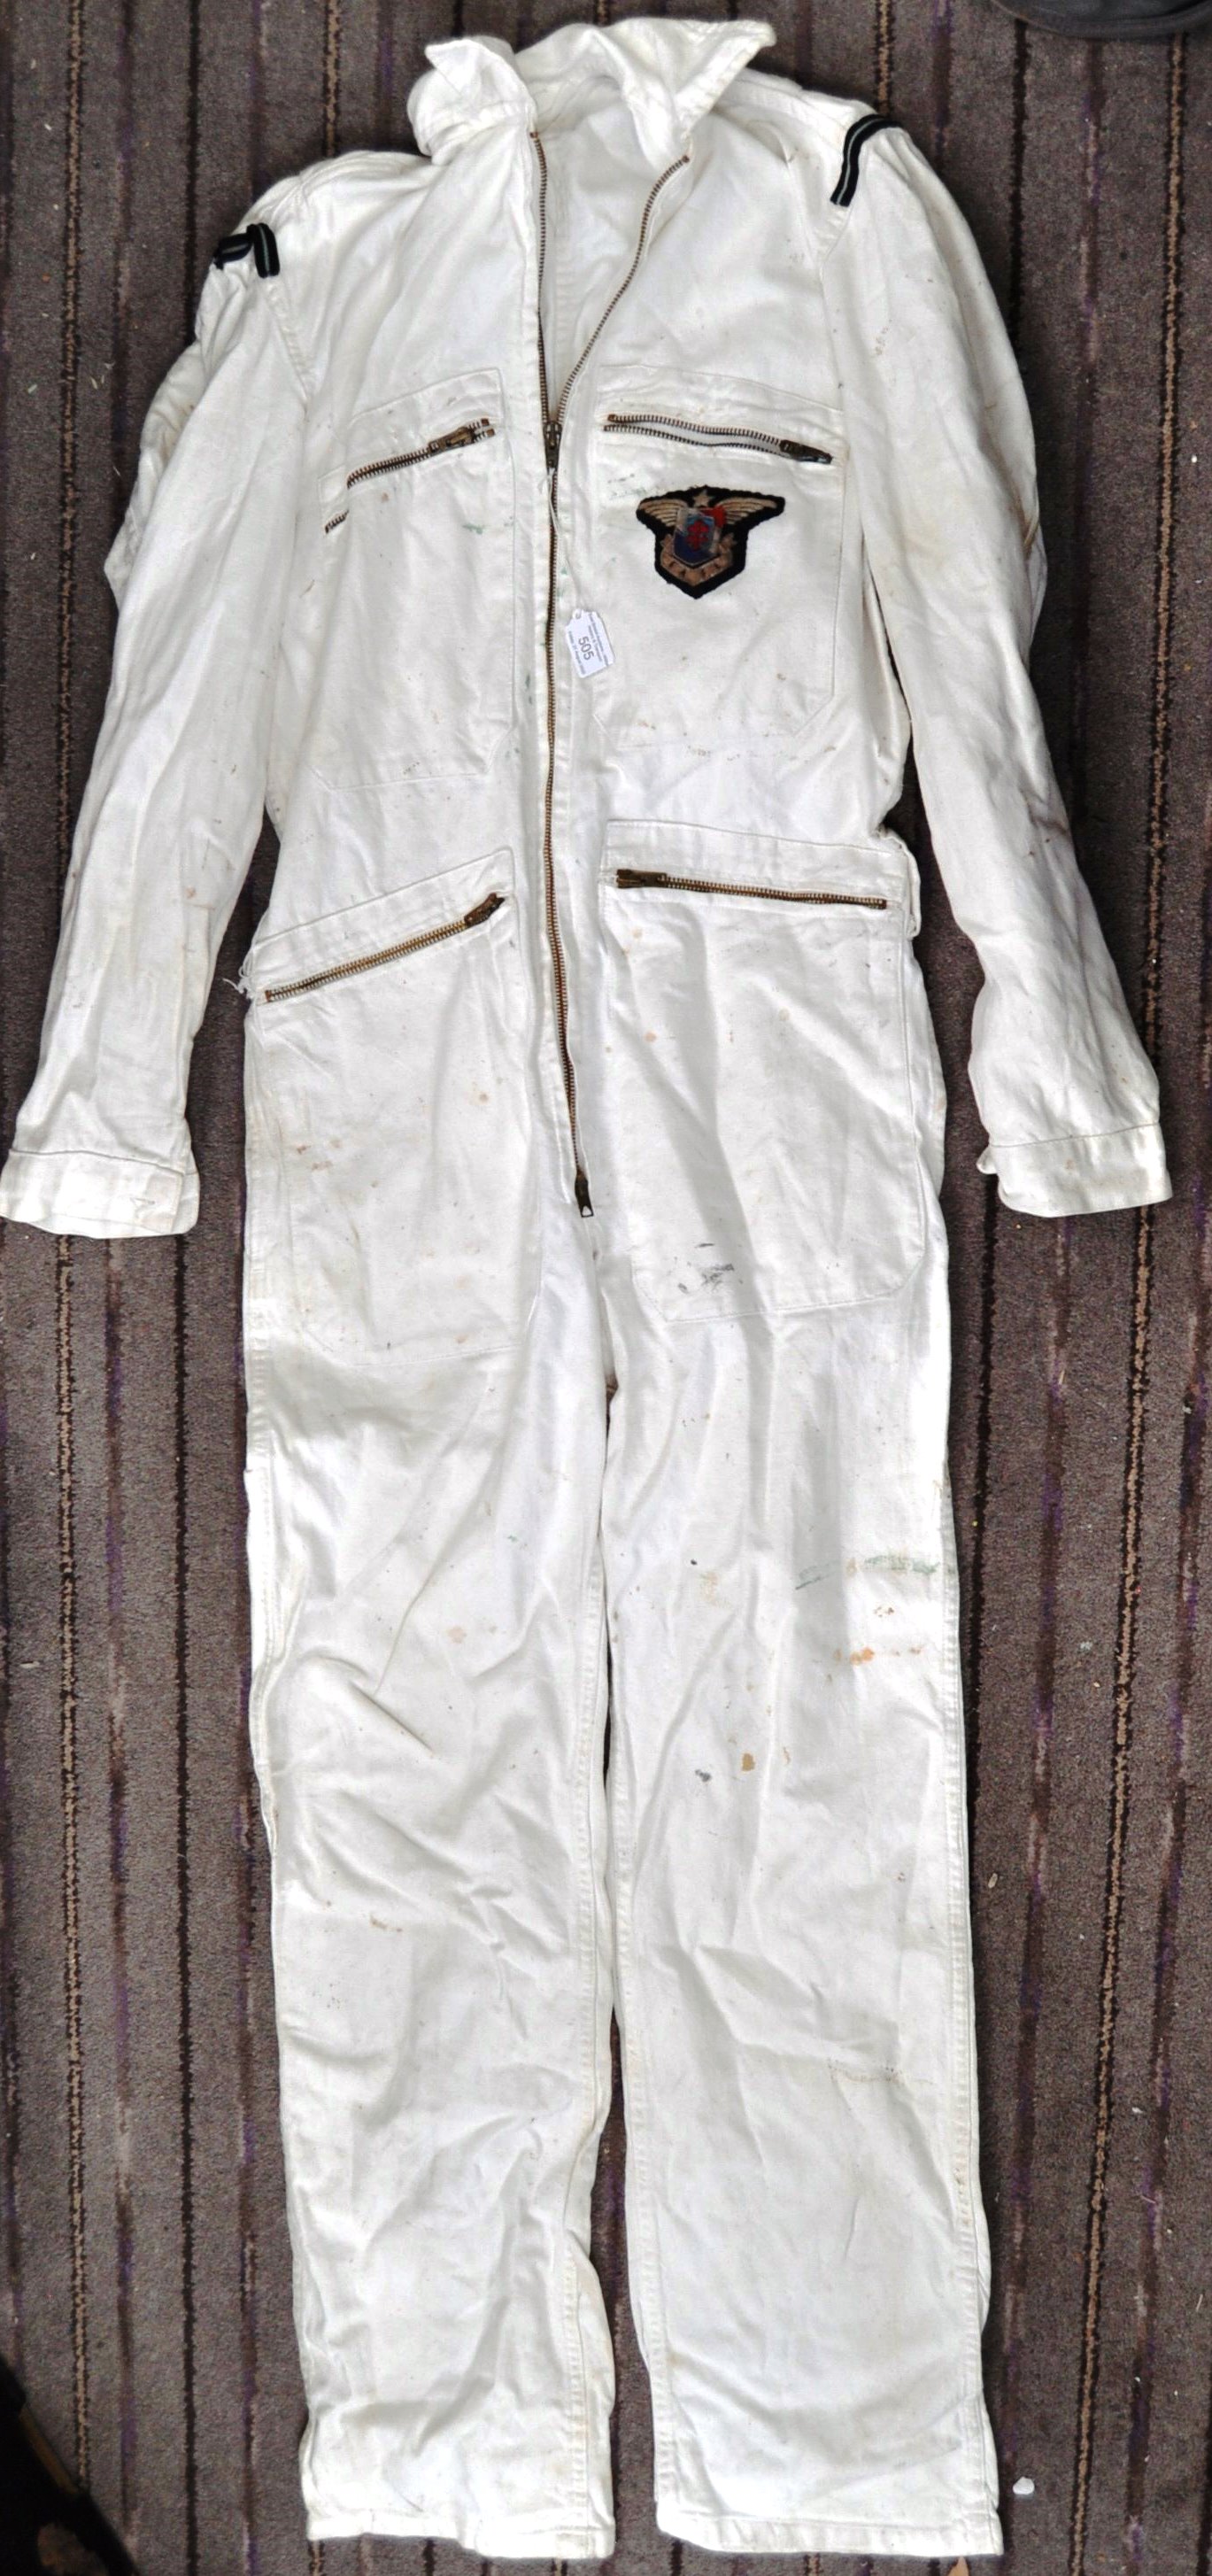 WWII SECOND WORLD WAR RELATED OVERALLS WITH PATCH